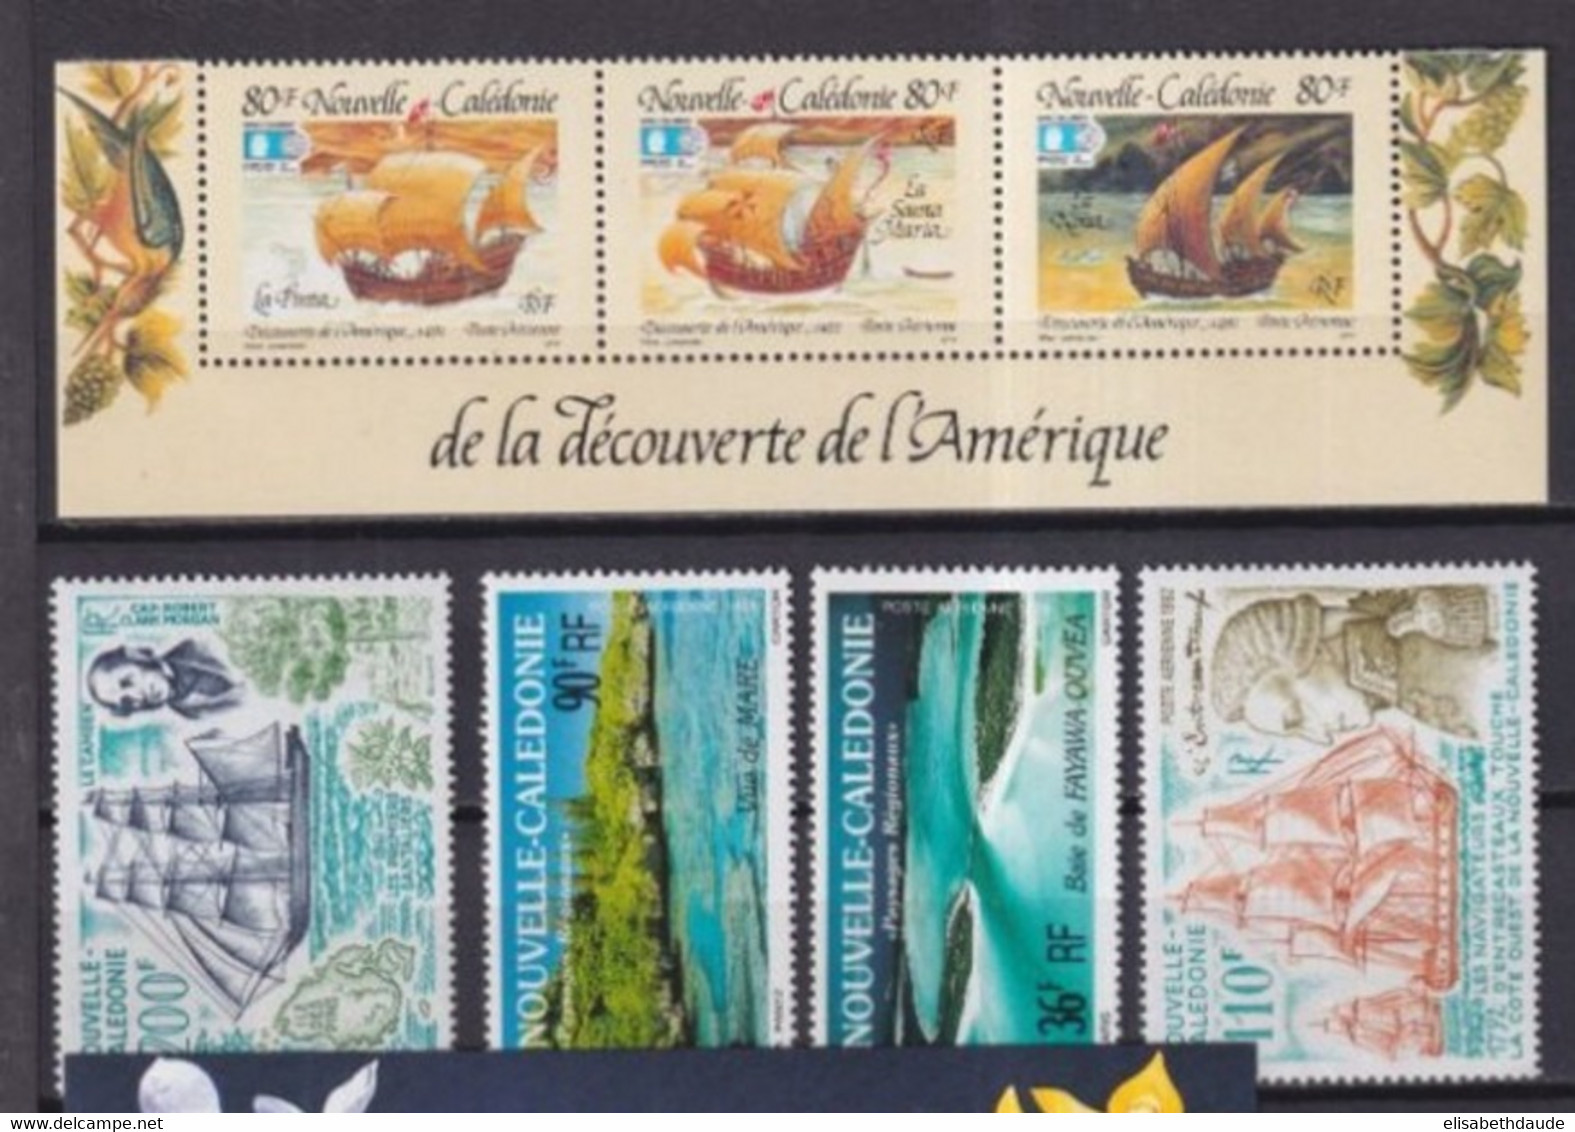 CALEDONIE - 1990/92 - COLLECTION 2 PAGES ! ** MNH - COTE YVERT 2017 = 106.1 EUR - Nuovi